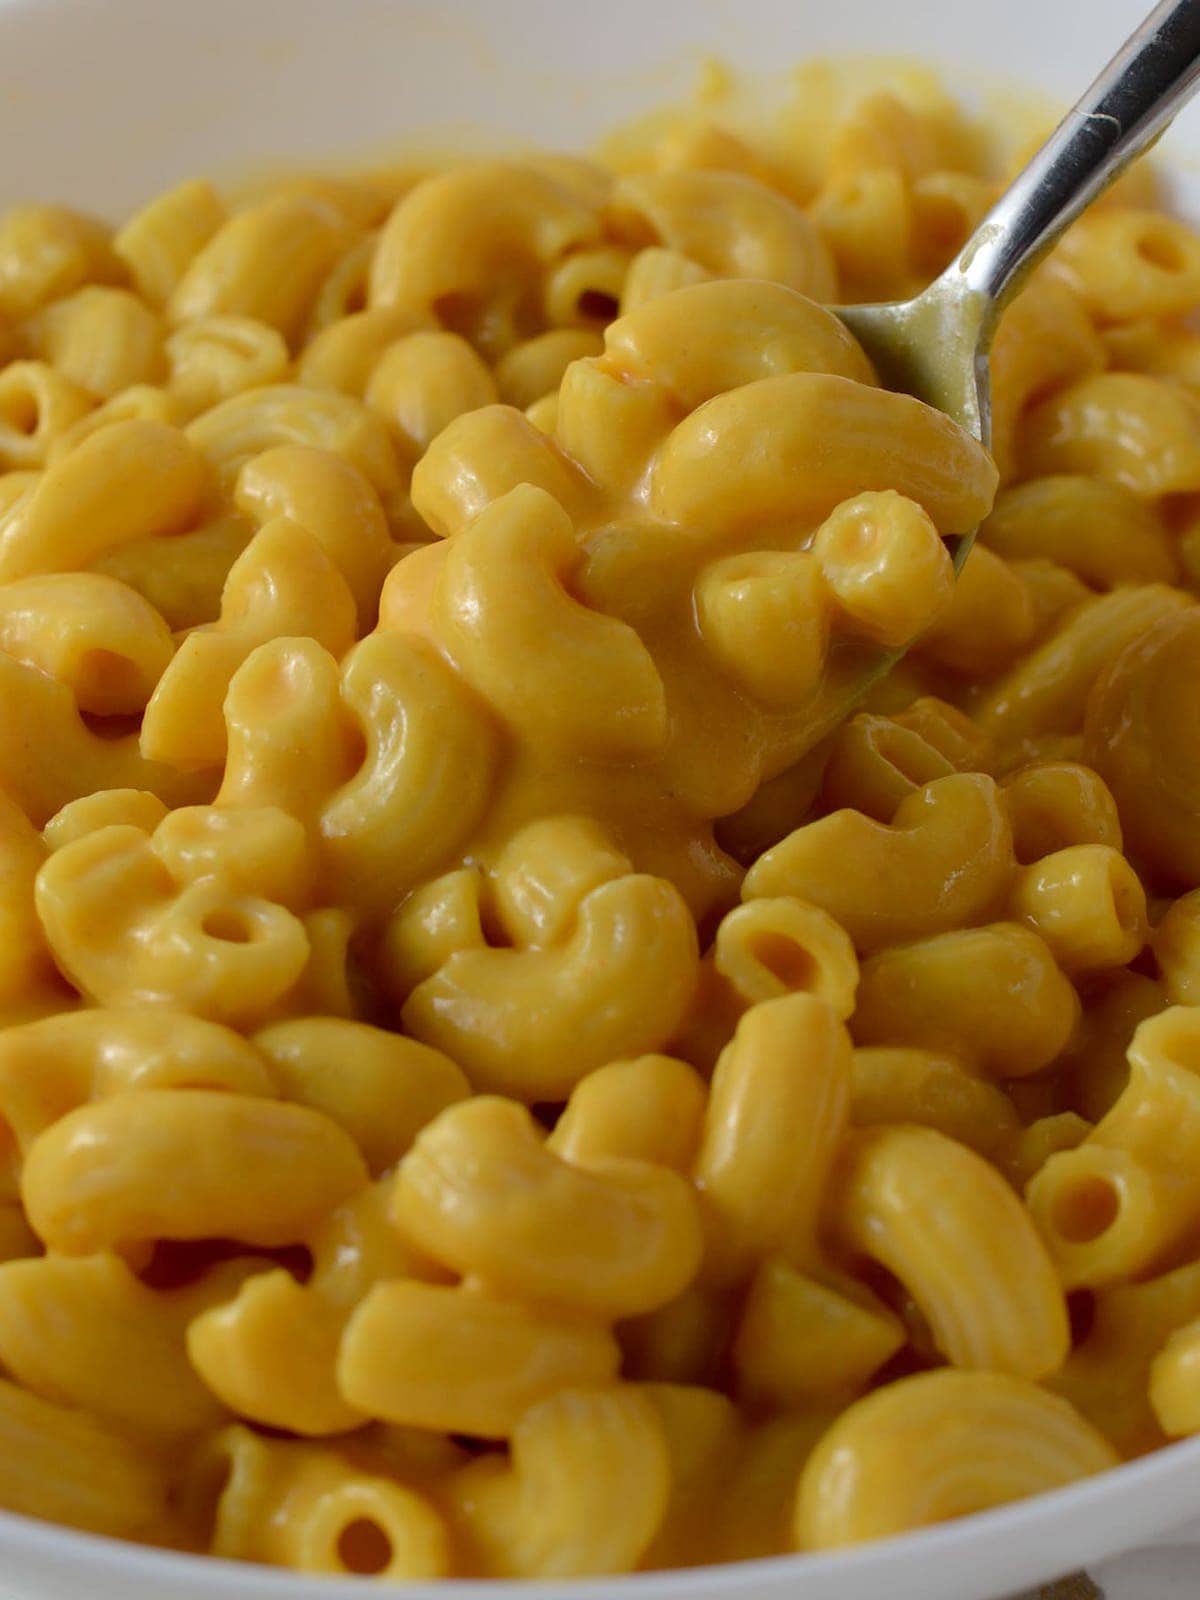 This is a photo of a spoonful of mac and cheese.